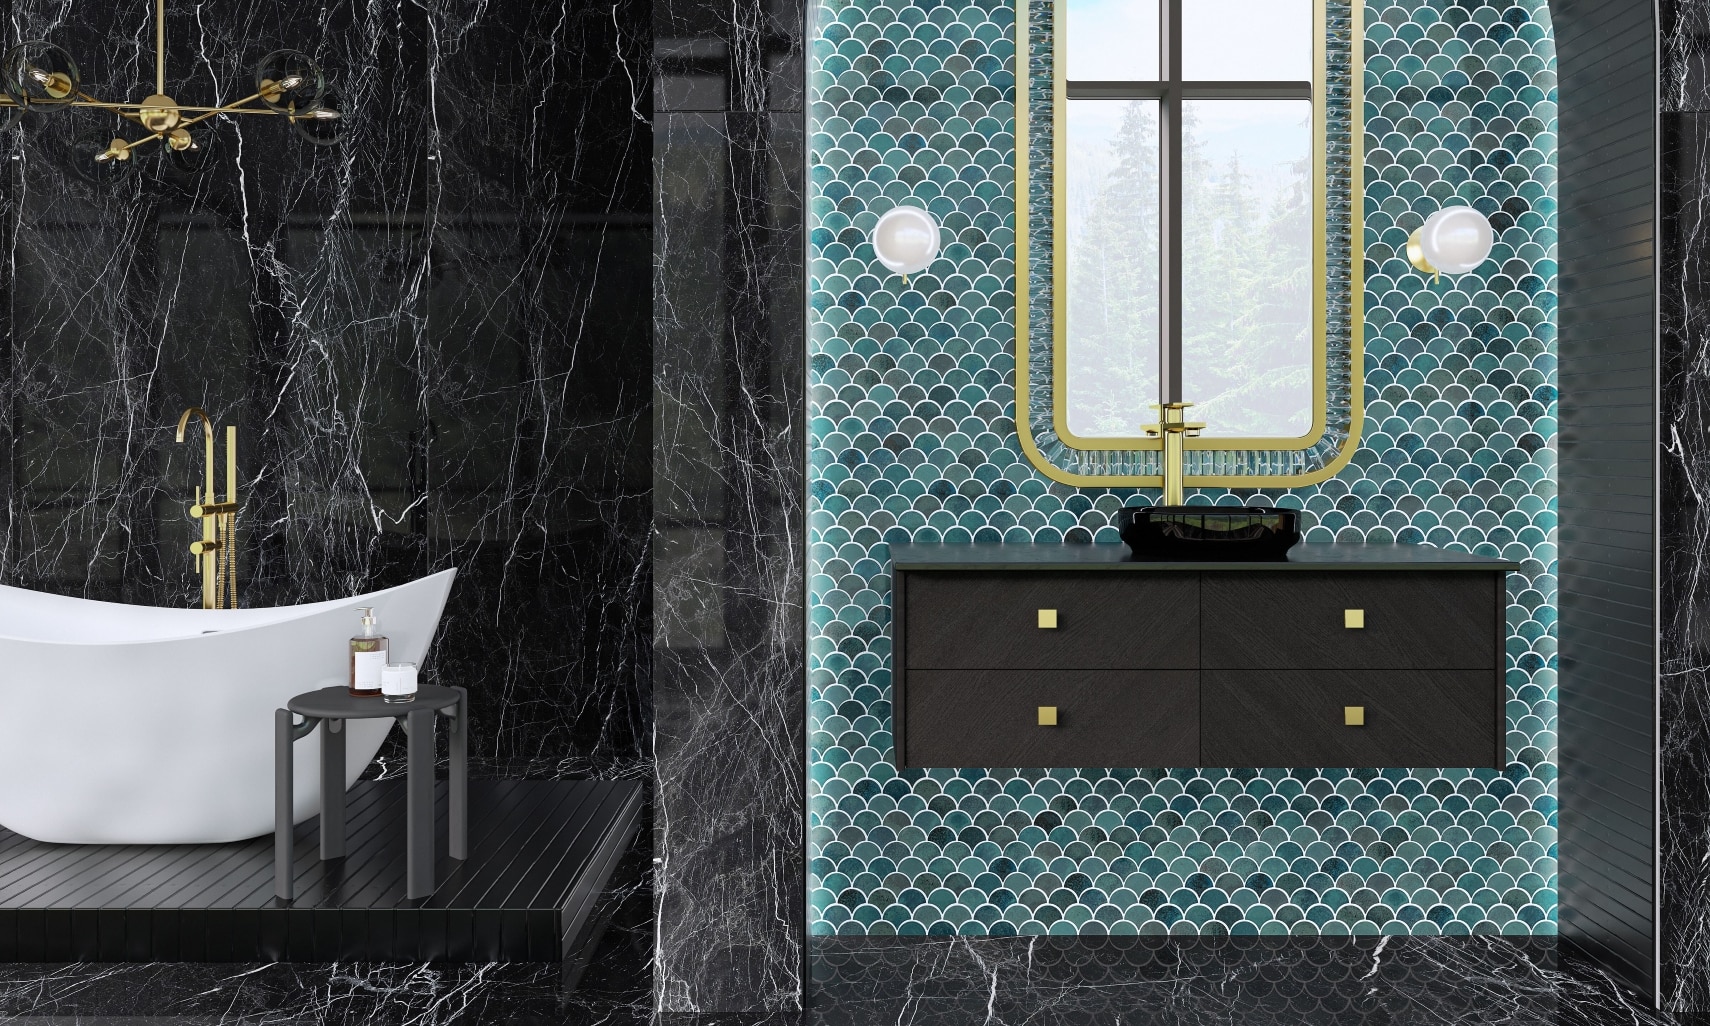 Luxury bathroom with white soaker tub, black and white, marble look, large formal porcelain floor tile and wall tile, floating vanity with teal, fan mosaic backsplash tile.